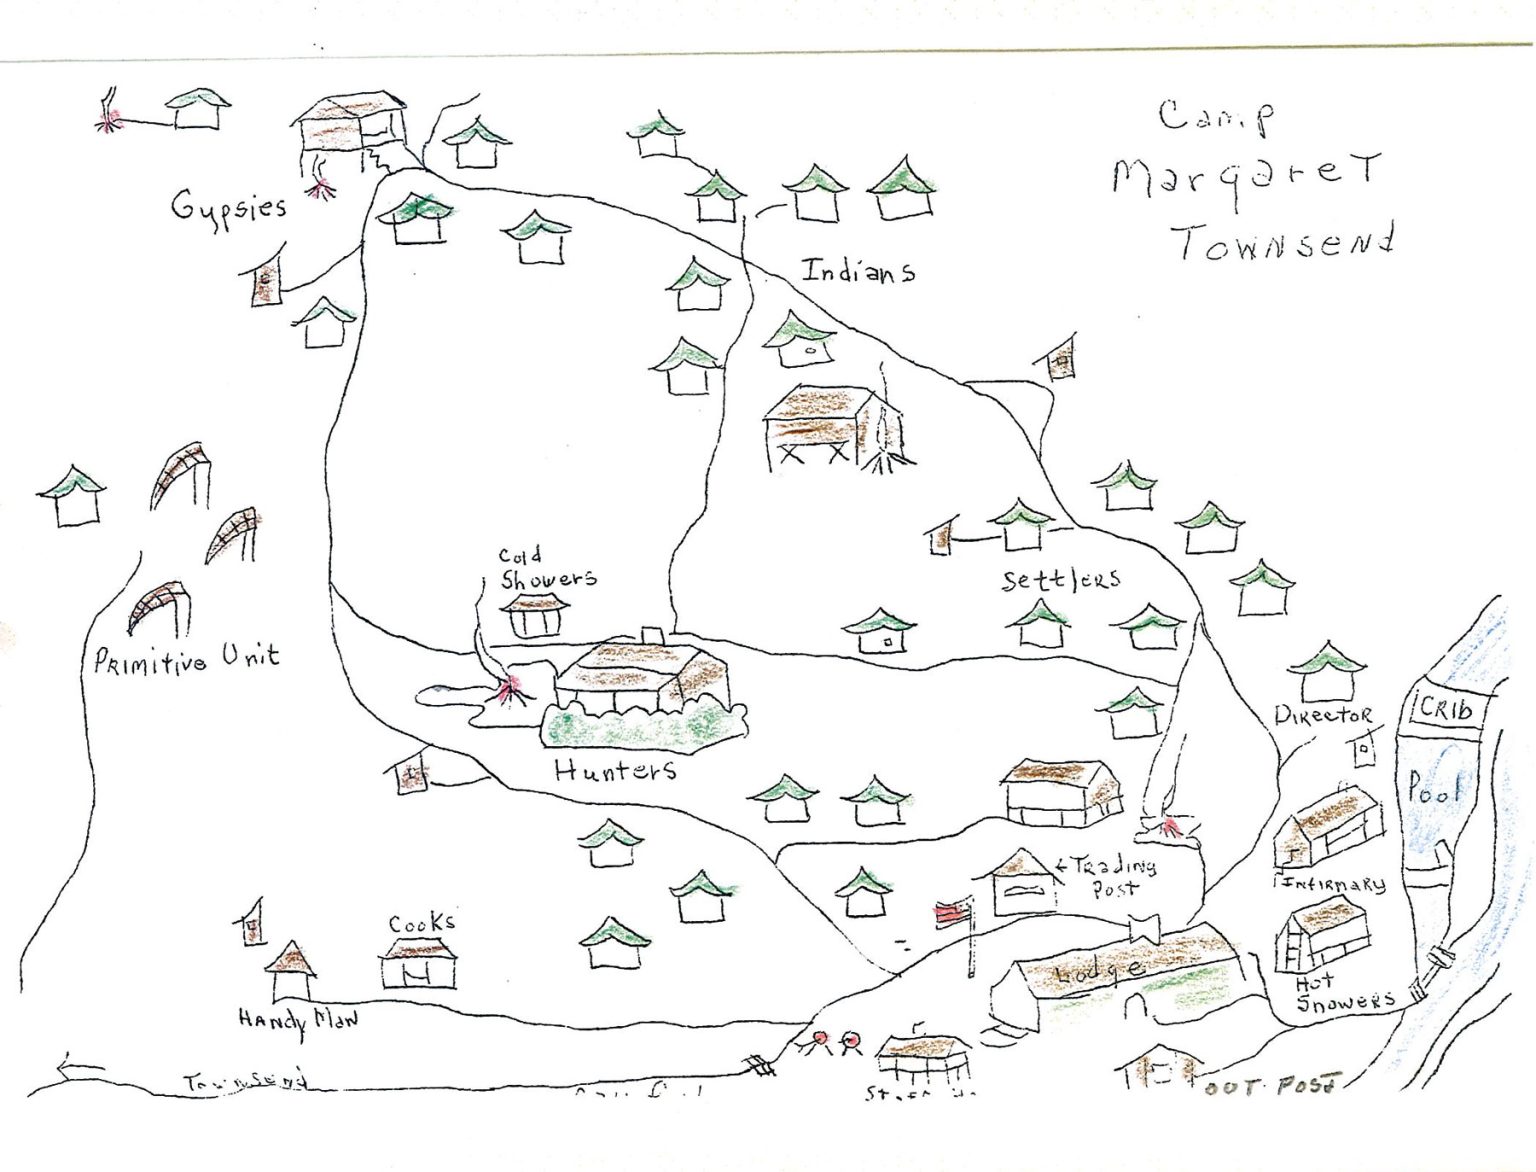 A hand drawn map of Camp Margaret Townsend, which operated in Walker Valley from 1925 to 1959. Courtesy of Jeremy Lloyd.